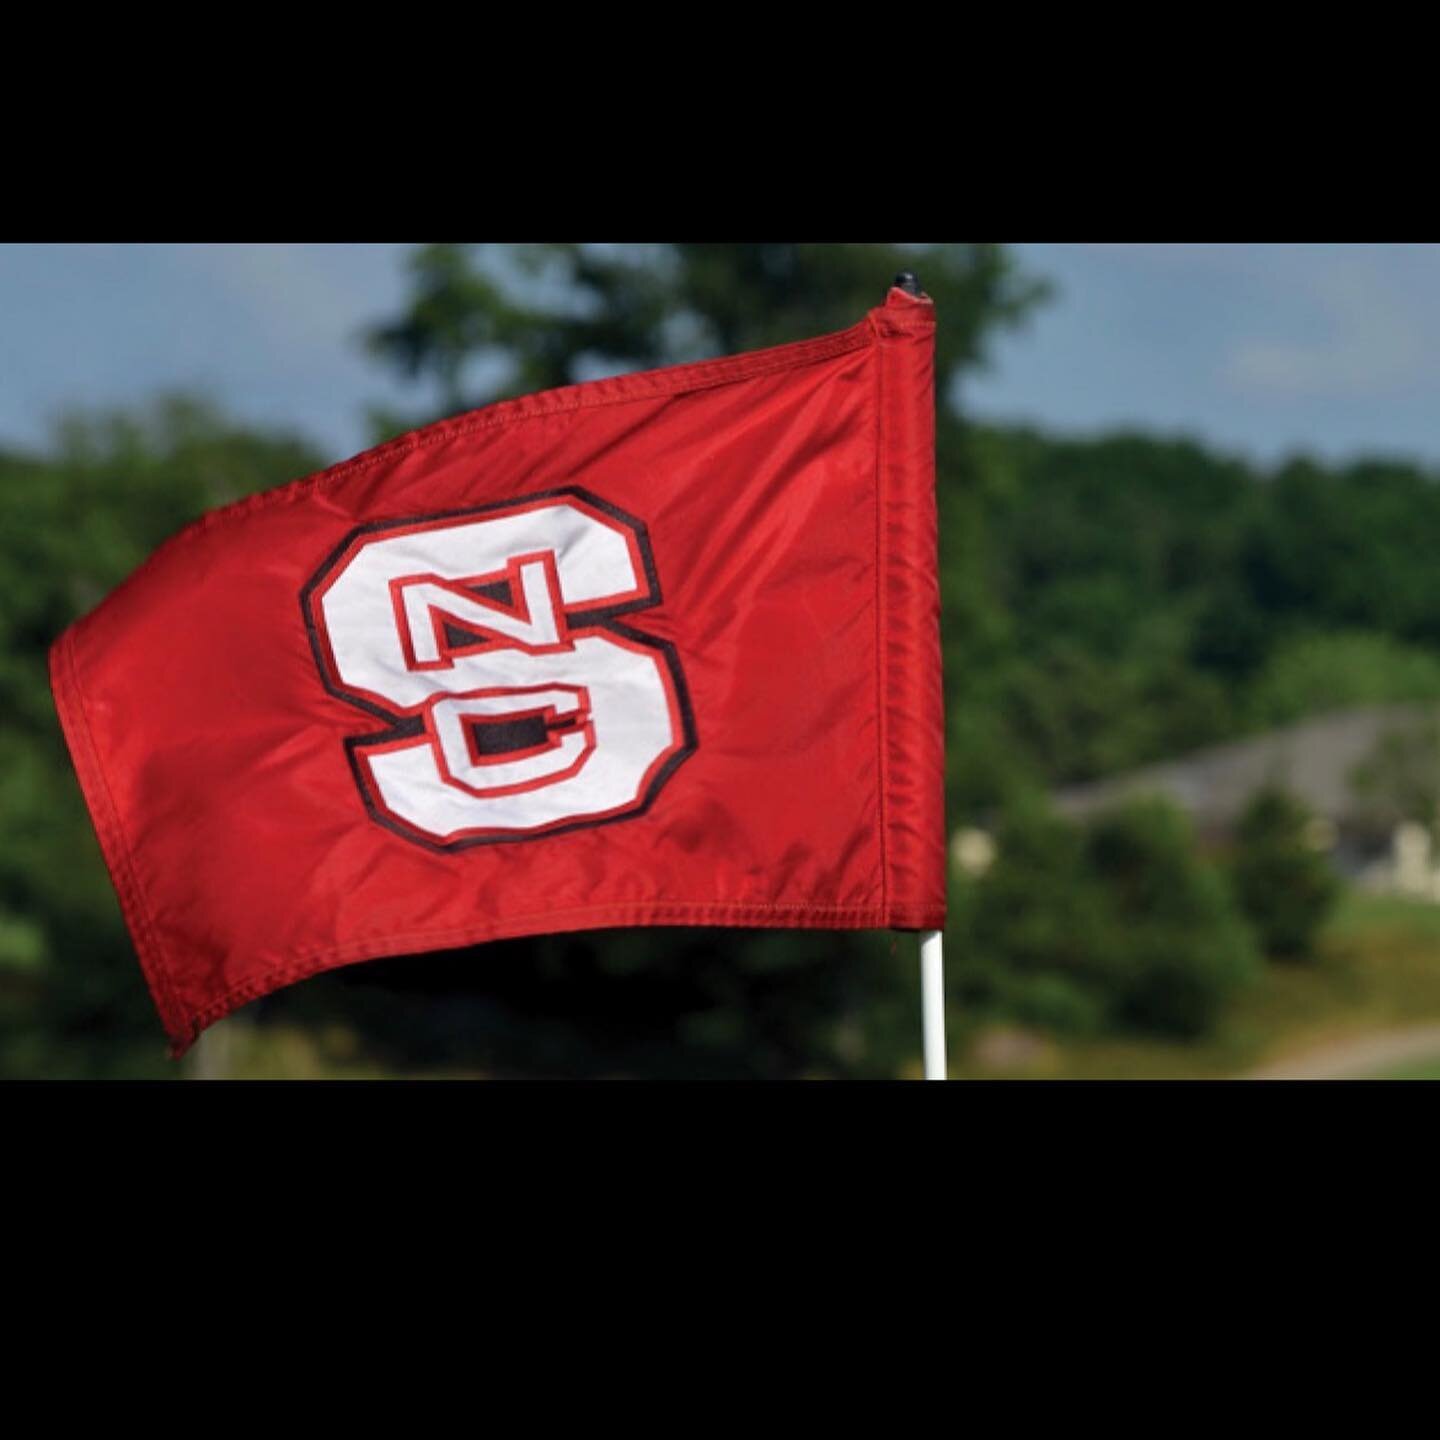 The Tours next event is Thursday, May 20th at Lonnie Poole Golf Club in Raleigh, NC. 

Come play and compete on the only college golf course Arnold Palmer ever designed! Lonnie Poole is home to the North Carolina State Wolfpack golf team. 

Pros and 